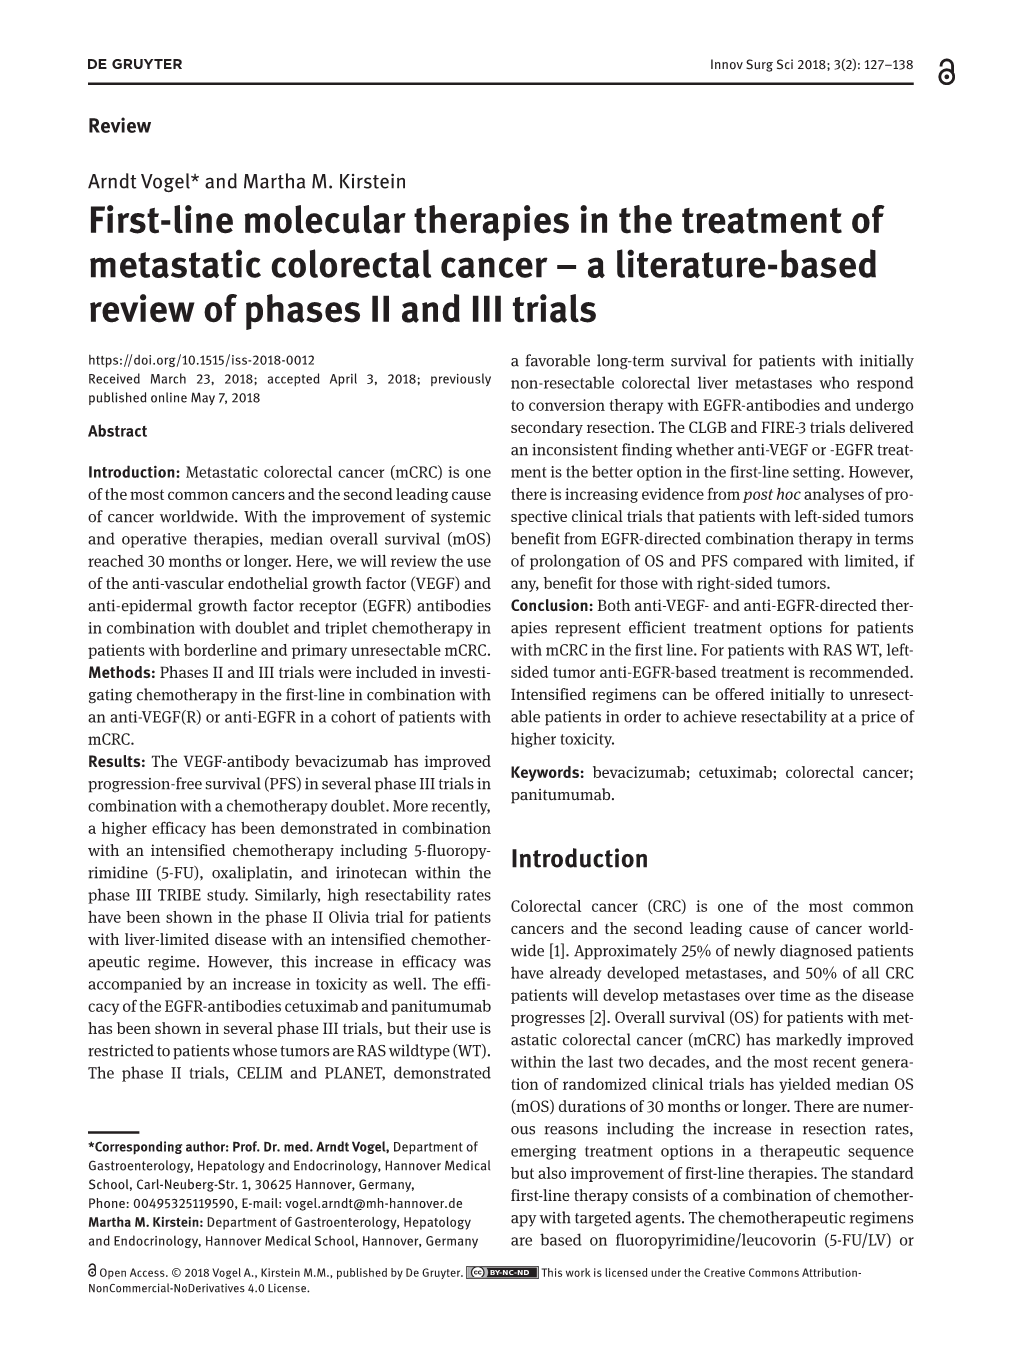 First-Line Molecular Therapies in the Treatment of Metastatic